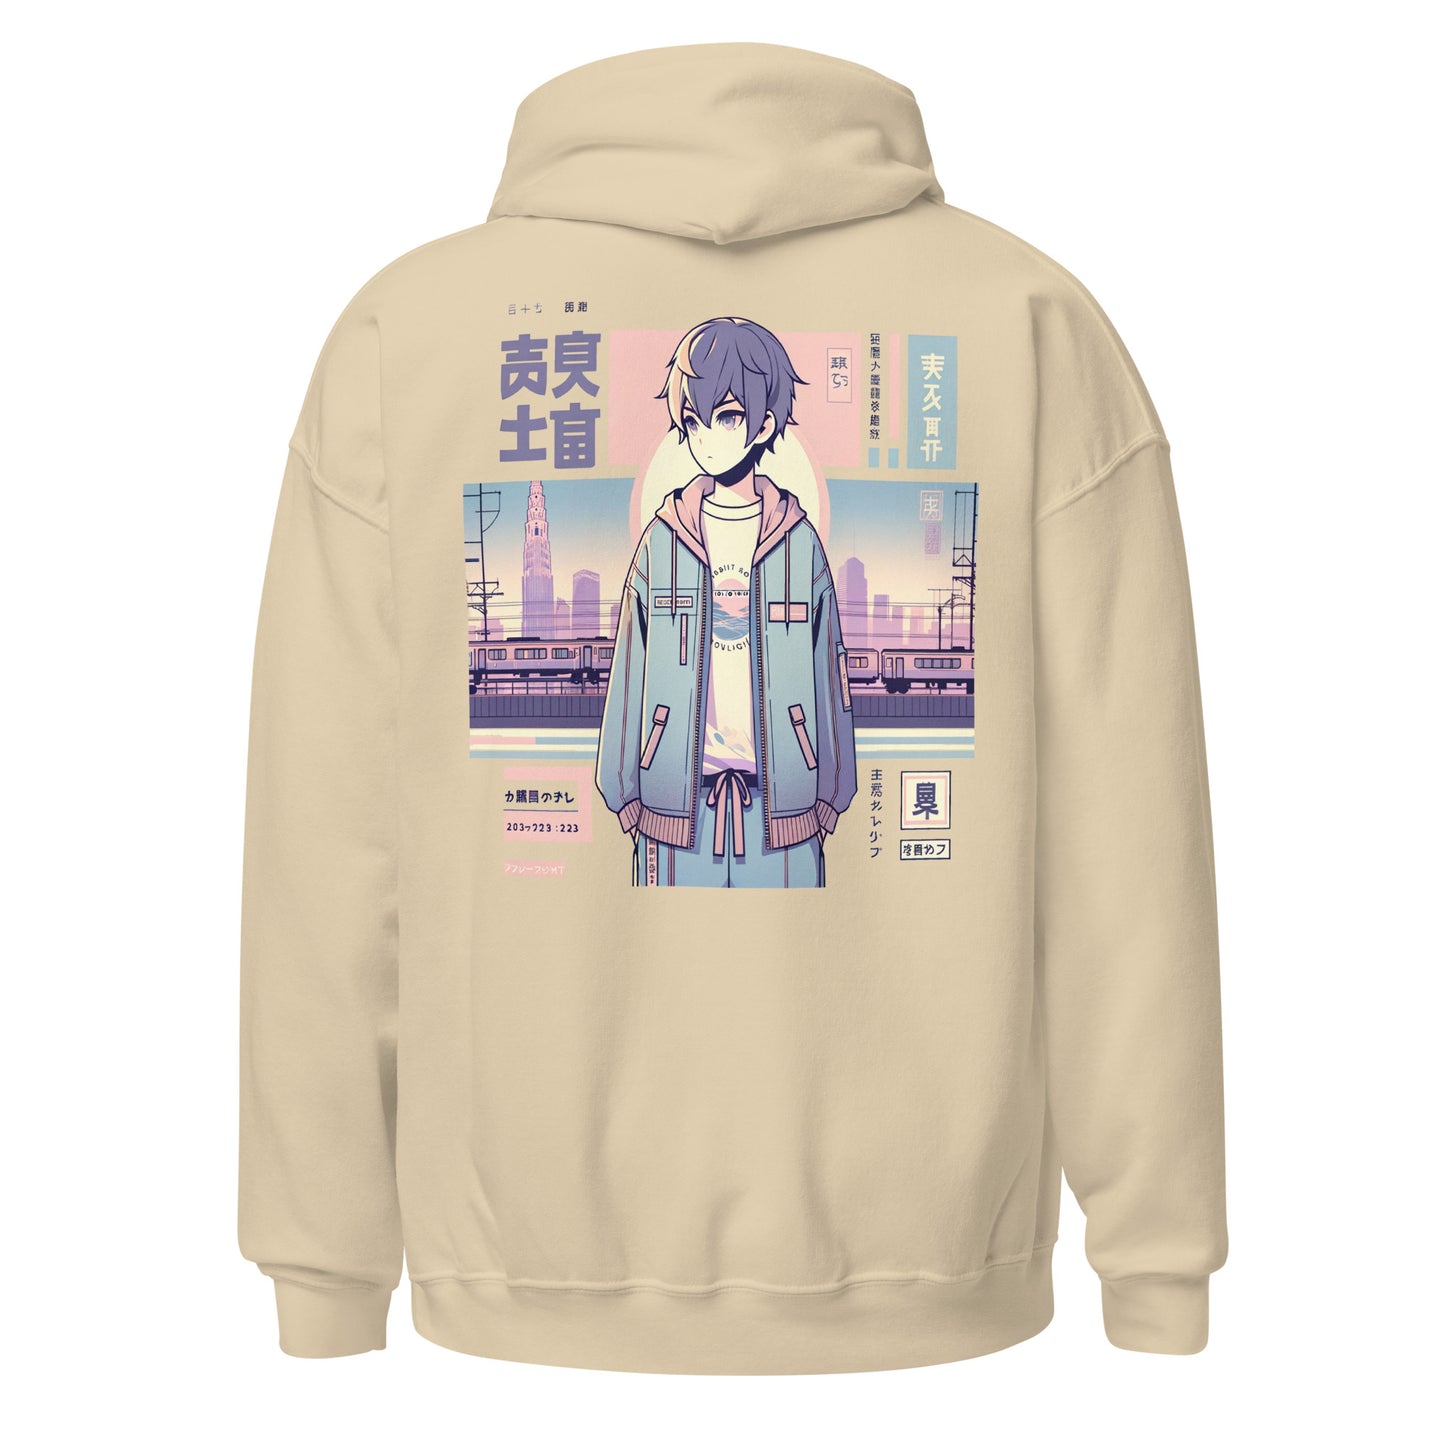 hoodie-from-the-back-with-japanese-street-art-symbol